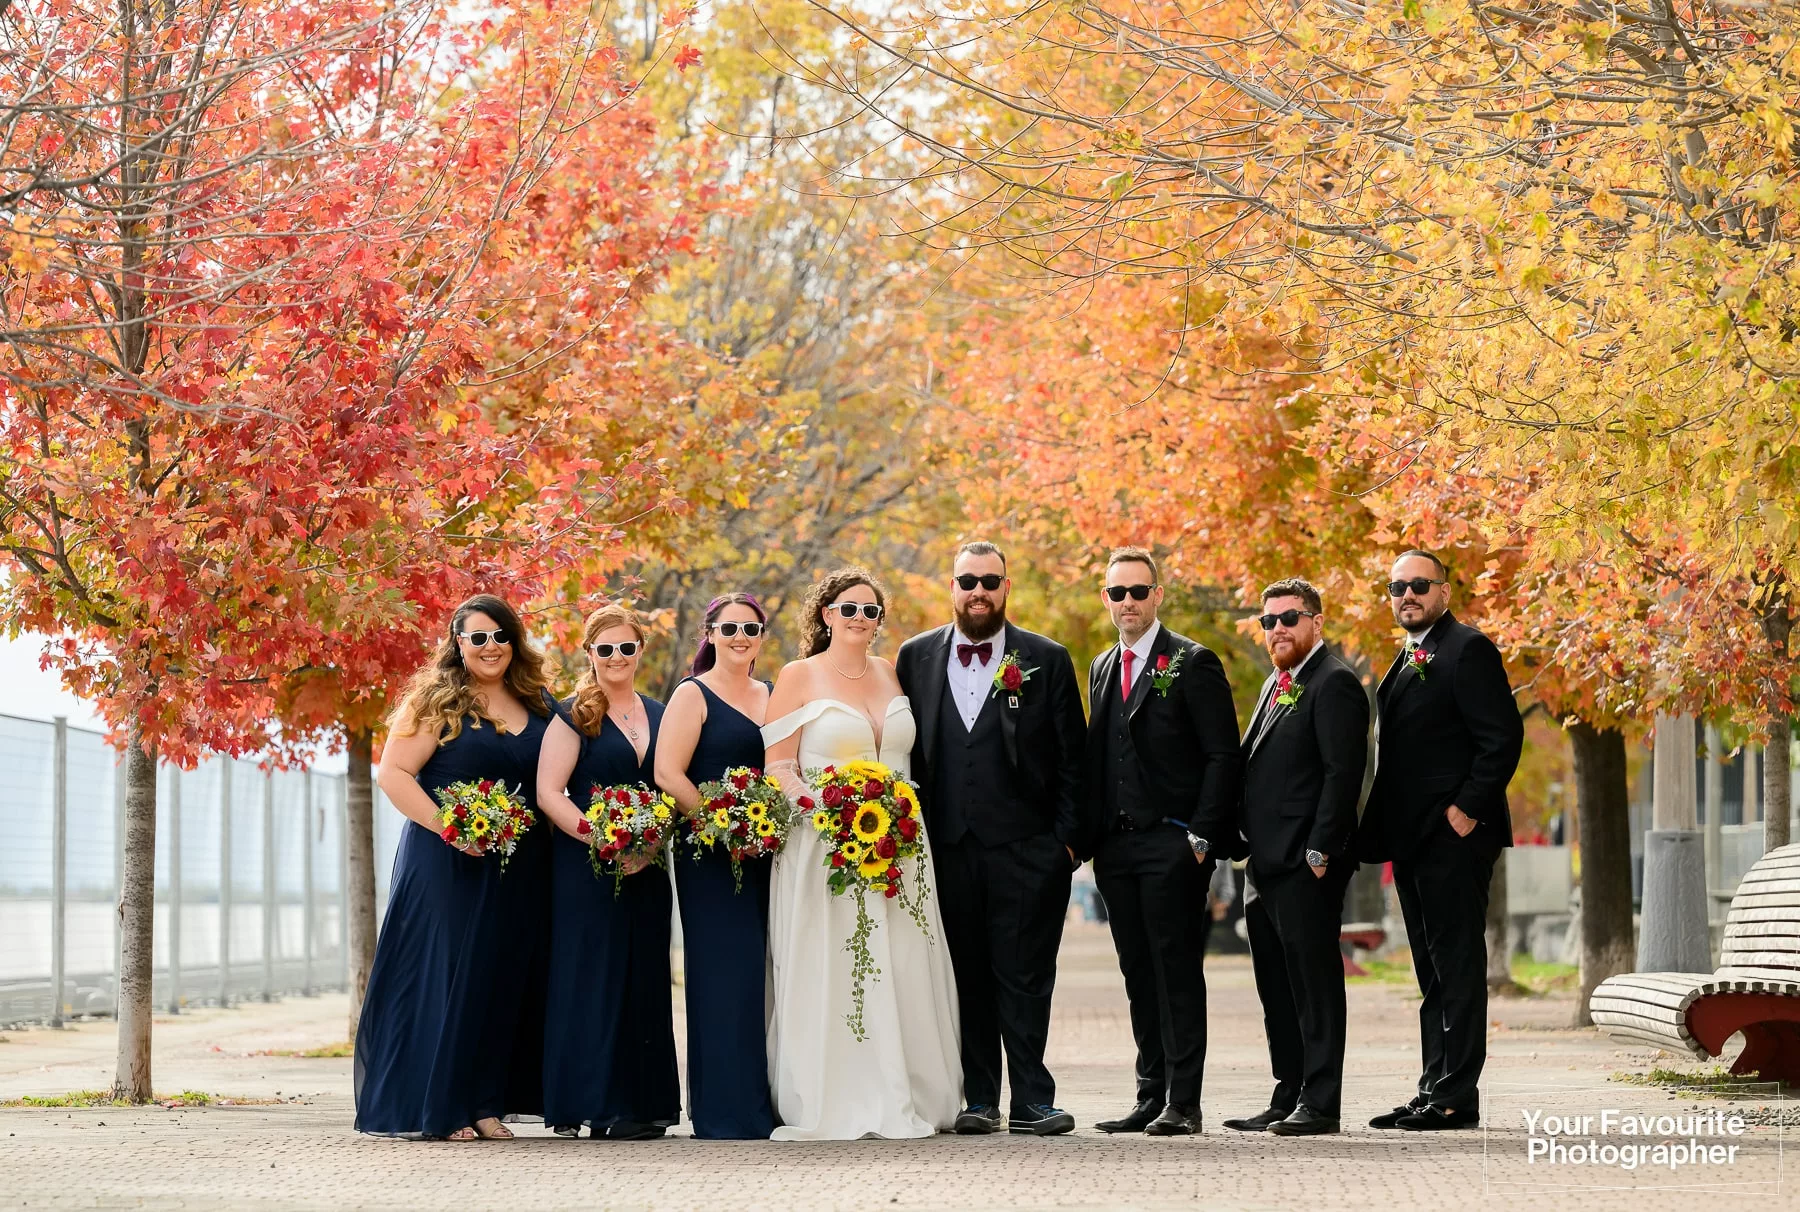 Wedding party in sunglasses poses on the Water's Edge Promenade in downtown Toronto, surrounded by fall foliage